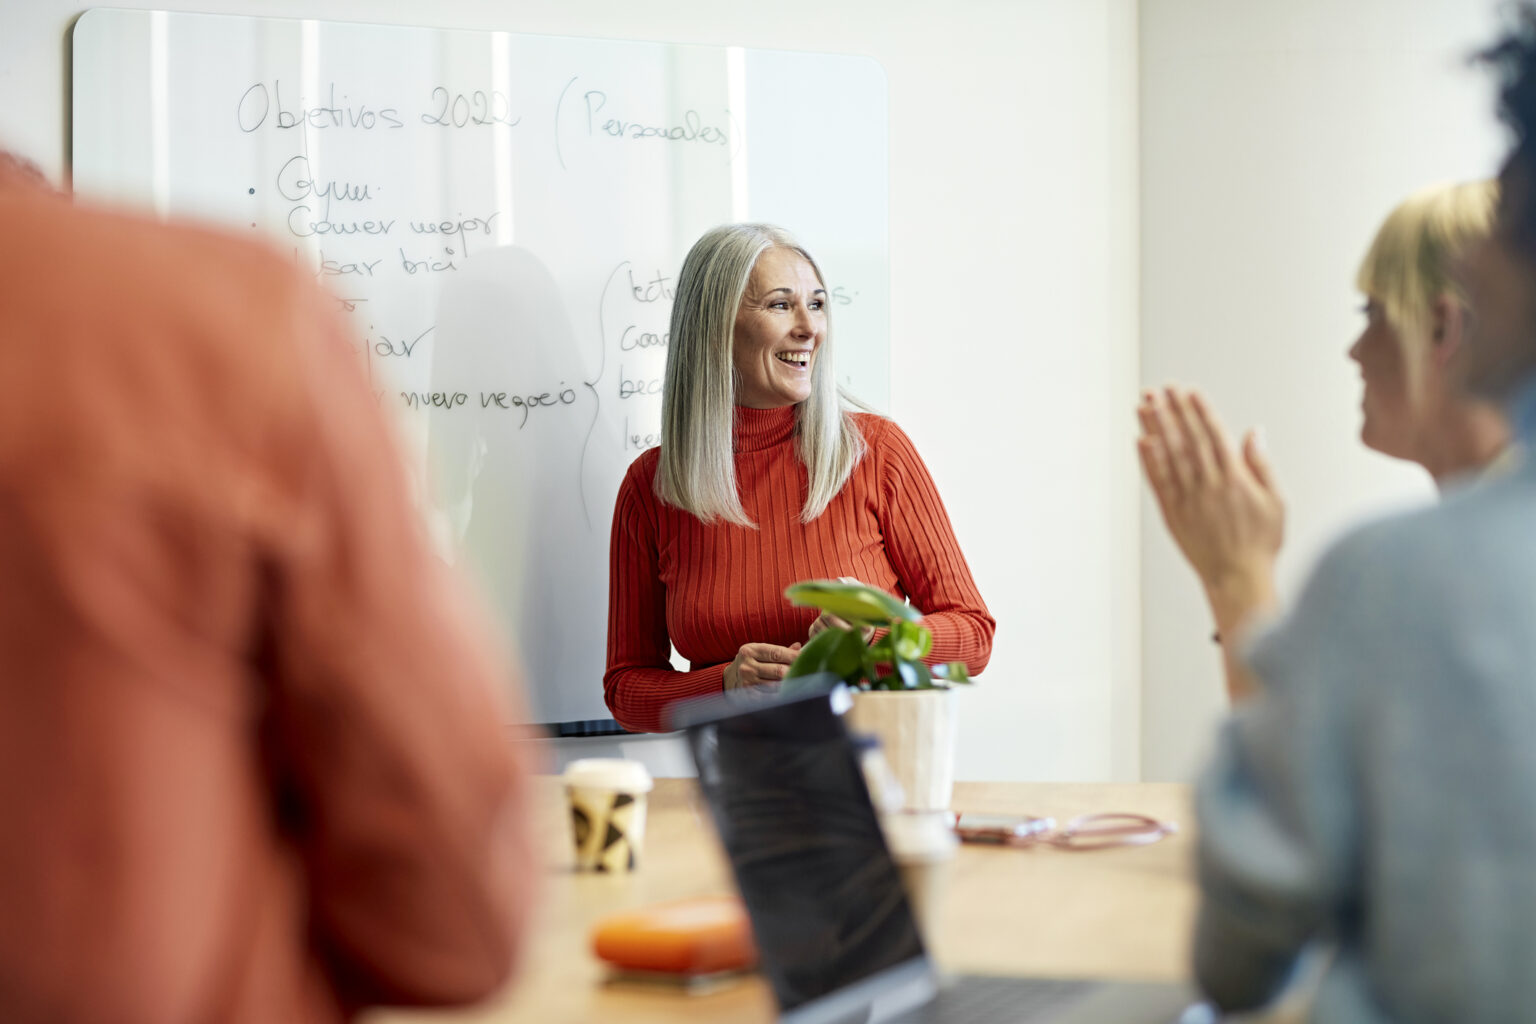 Woman receives applause from colleagues during a meeting where she is presenting on a whiteboard.